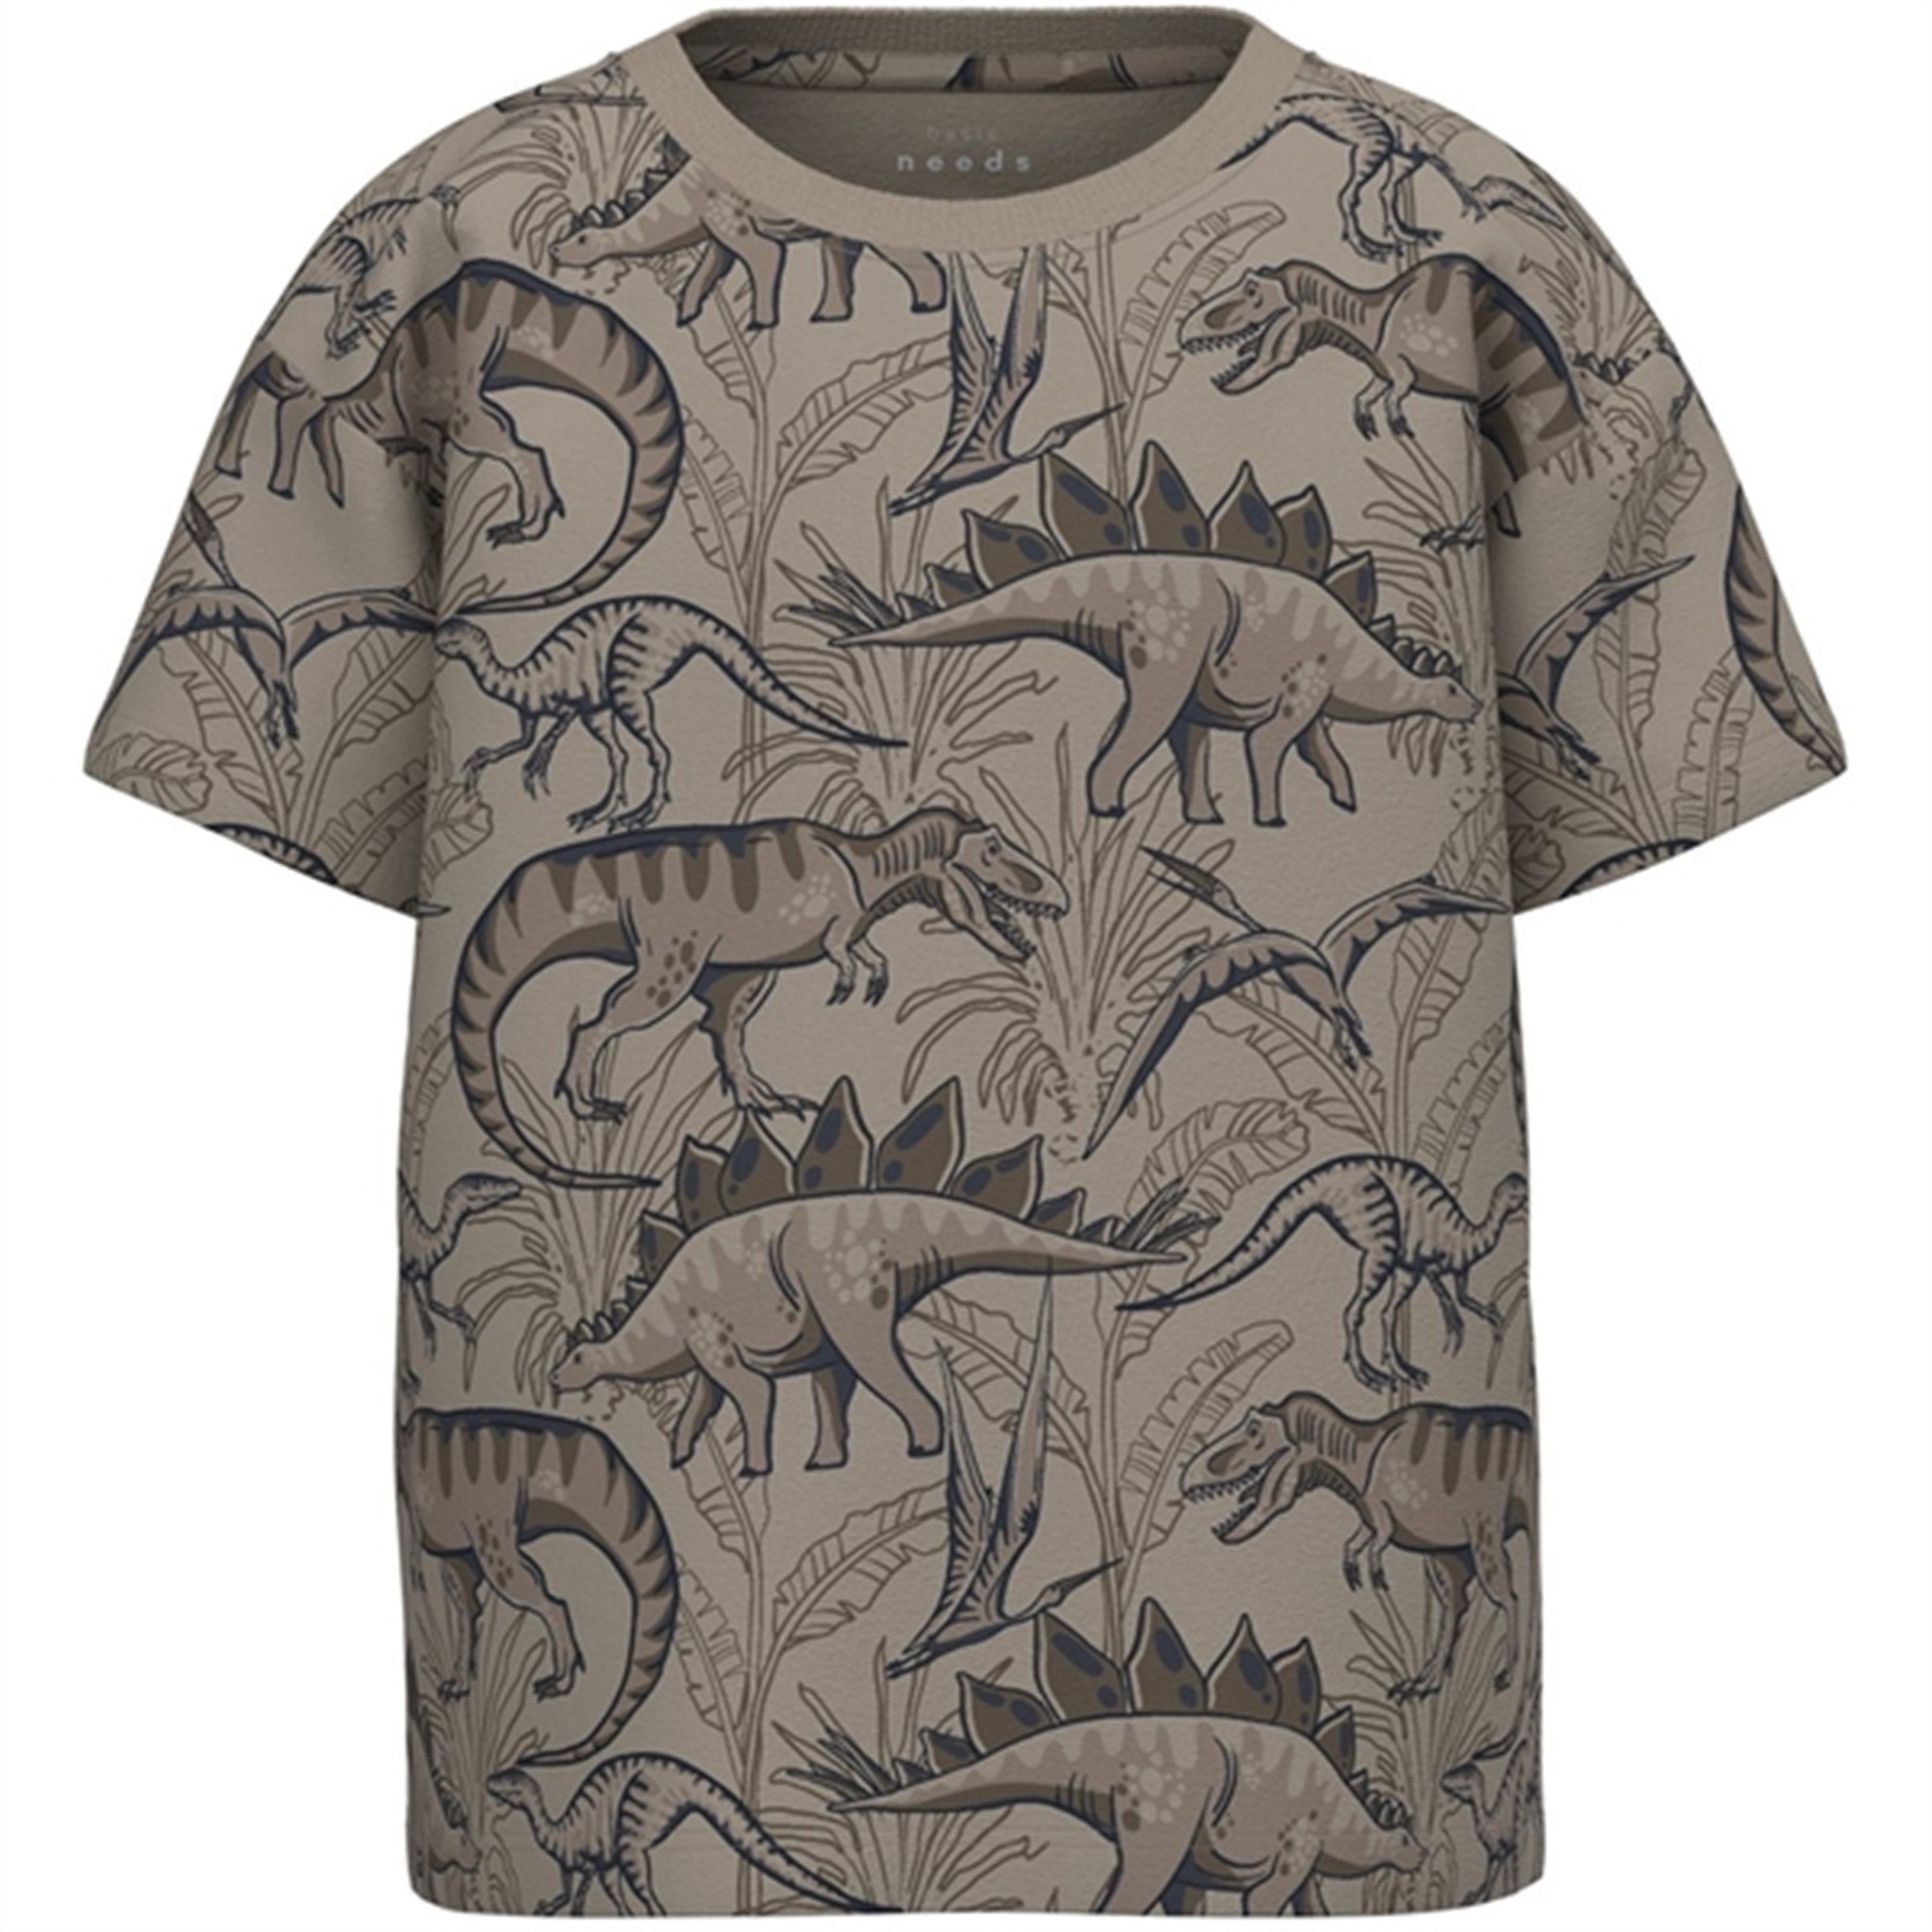 Name it Pure Cashmere Dinosaur Valther T-Shirt